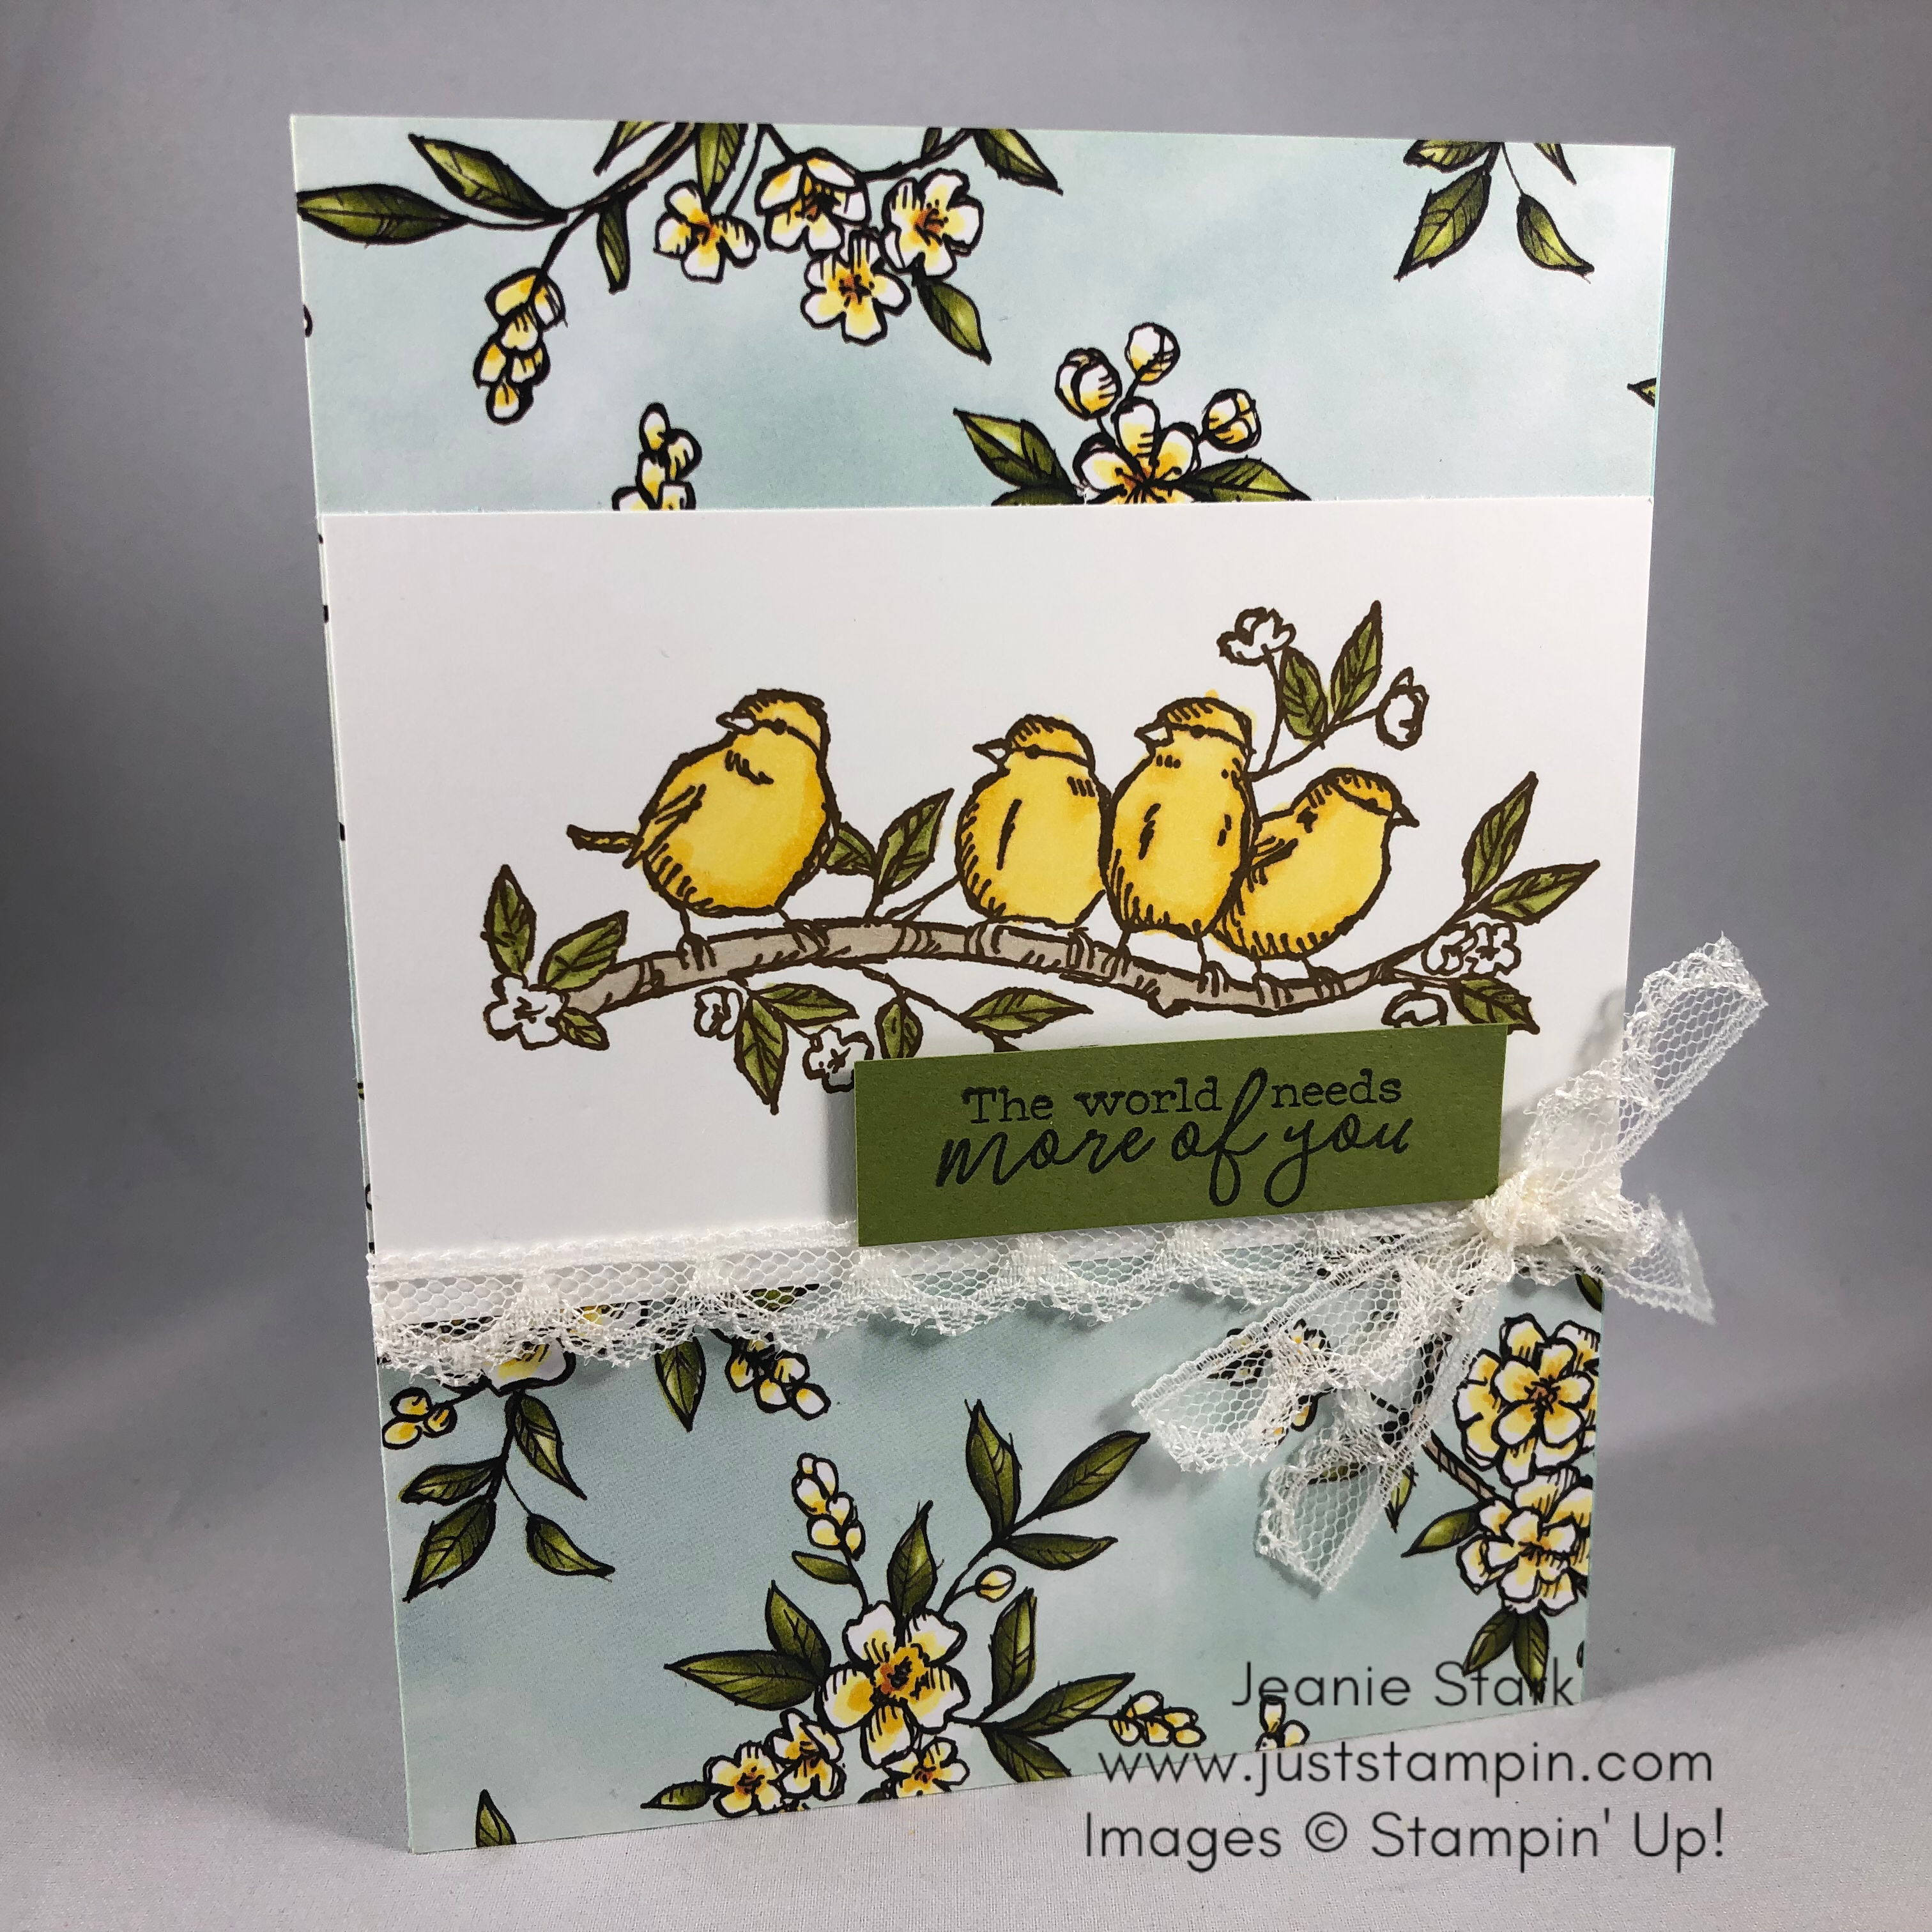 Stampin' Up! Free As A Bird all occasion card idea - Jeanie Stark StampinUp